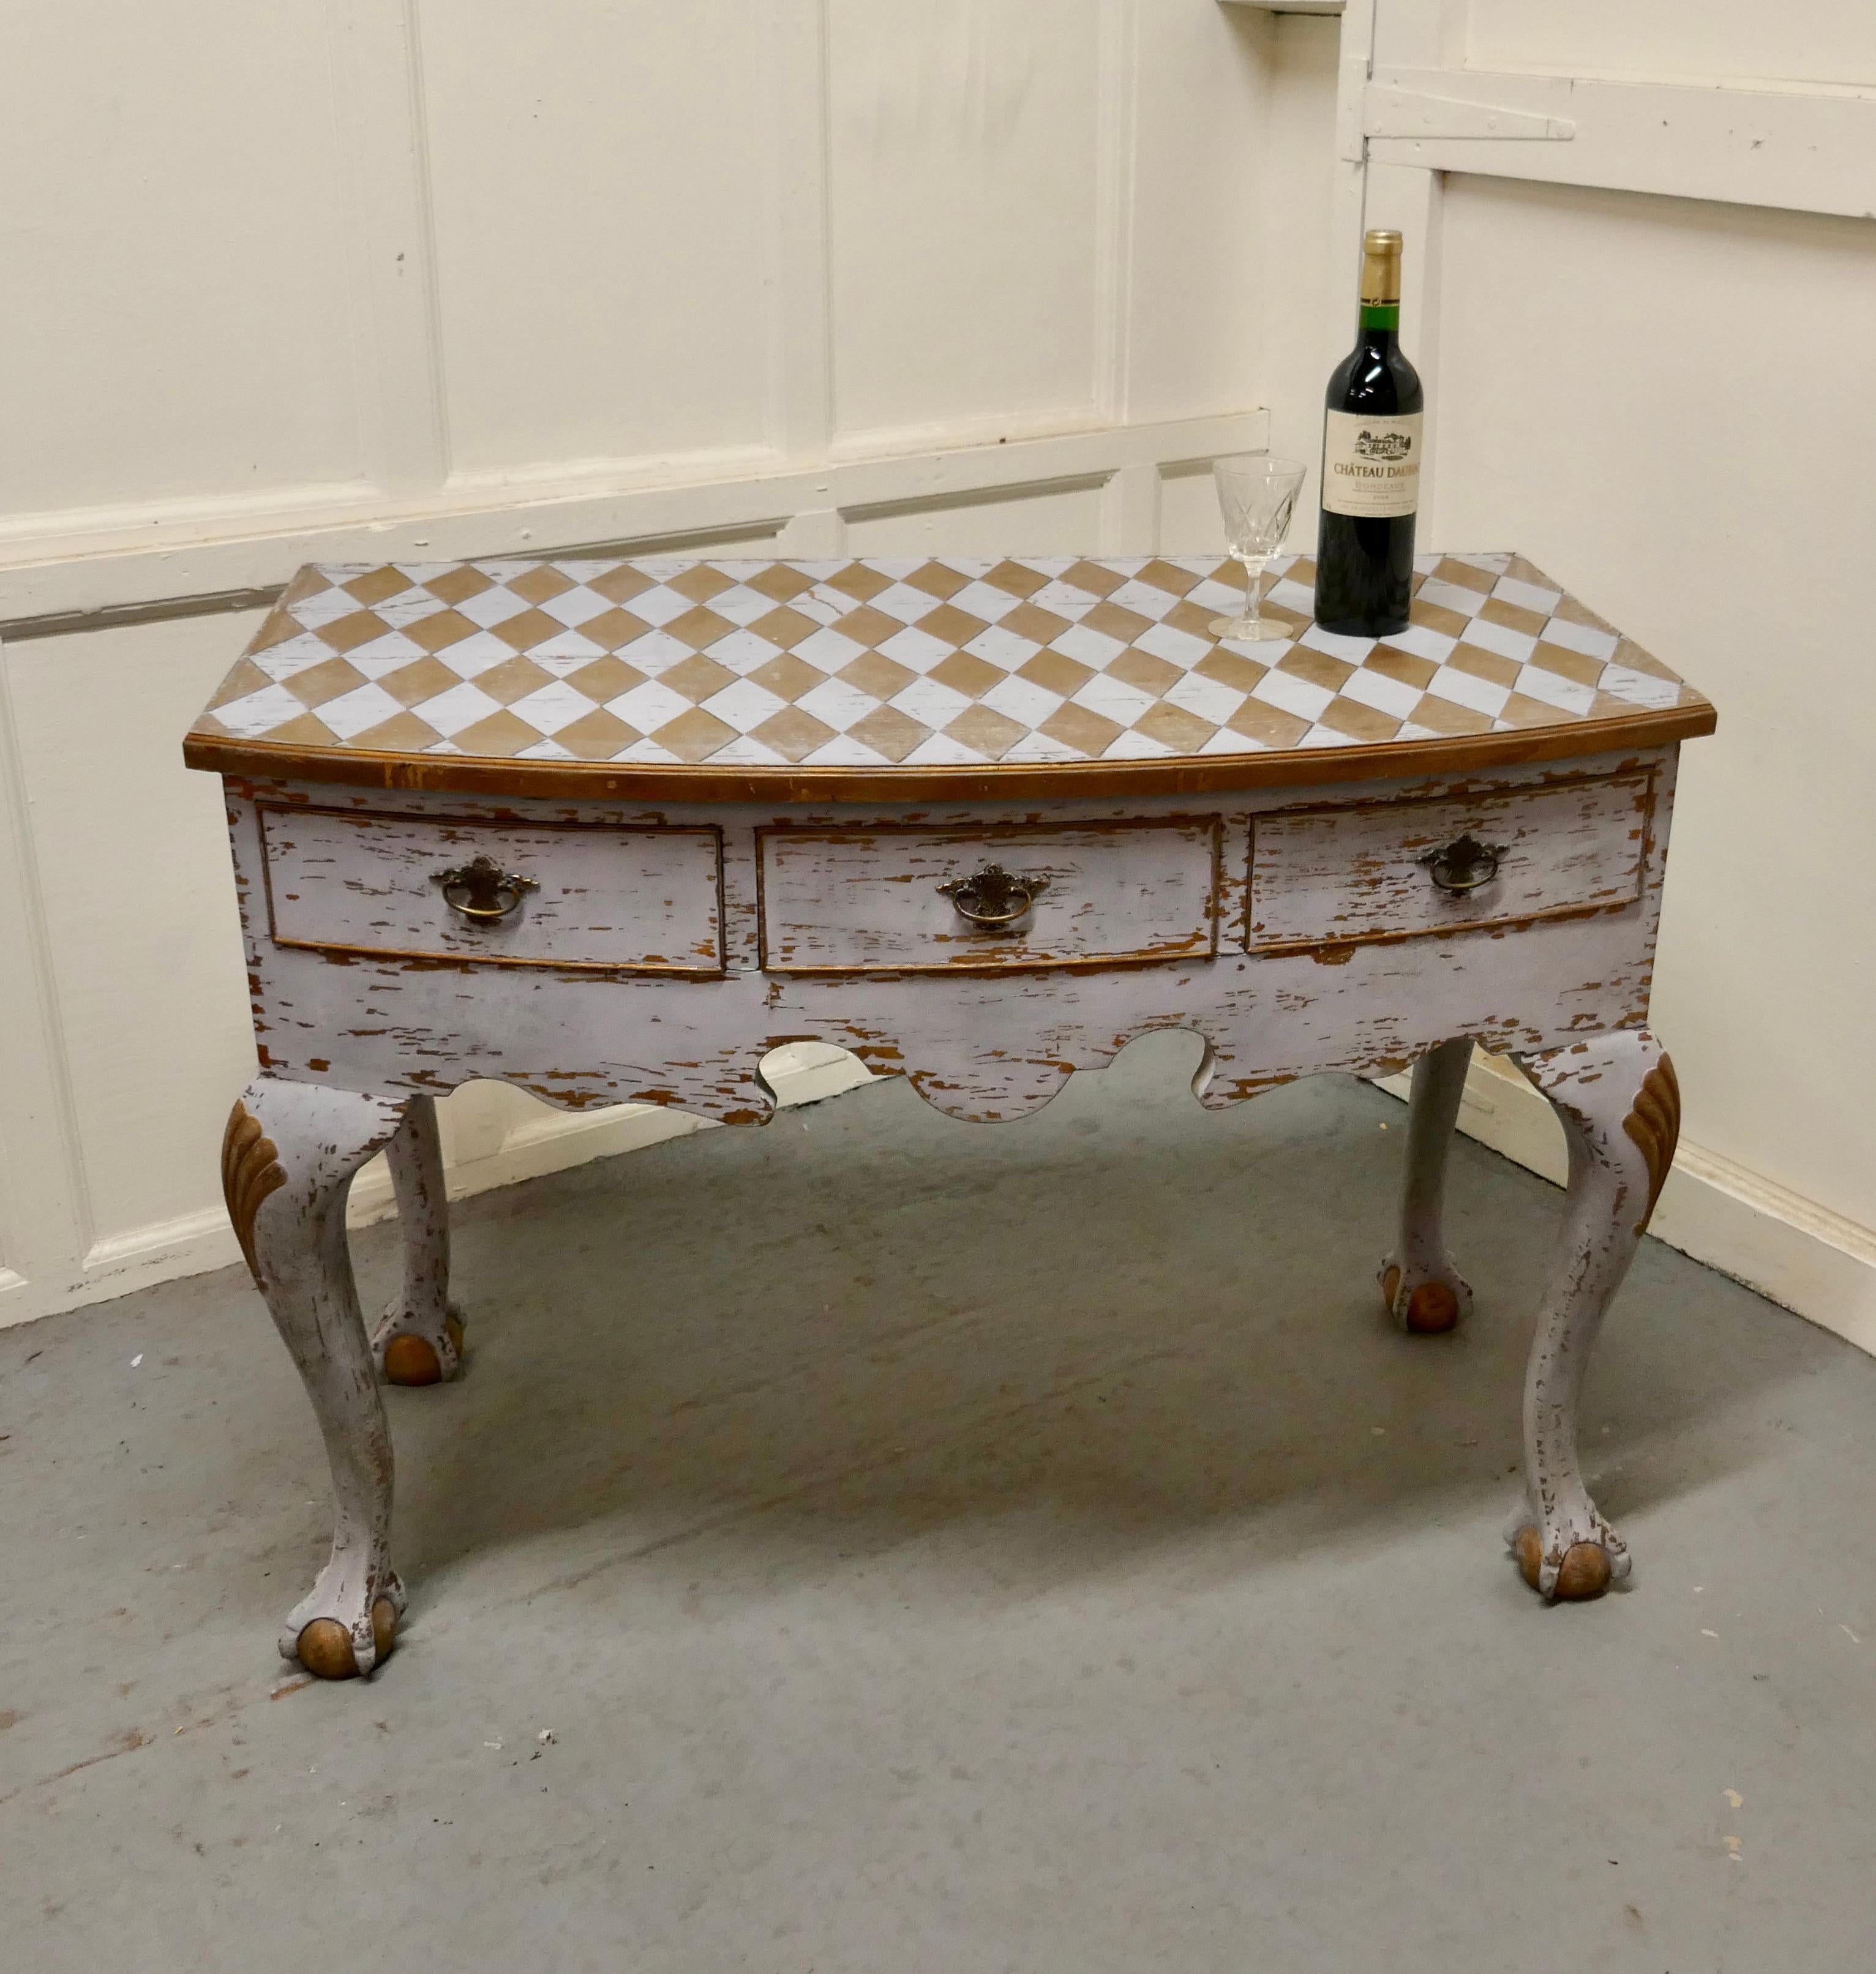 Georgian Baroque Bow Front Painted Console Side Table

A Unique piece, the table dates from around 18oo, it is decorated in Harlequin, the table stands on chunky cabriole kegs and has 3 drawers to the bow front
The table has distressed finish in